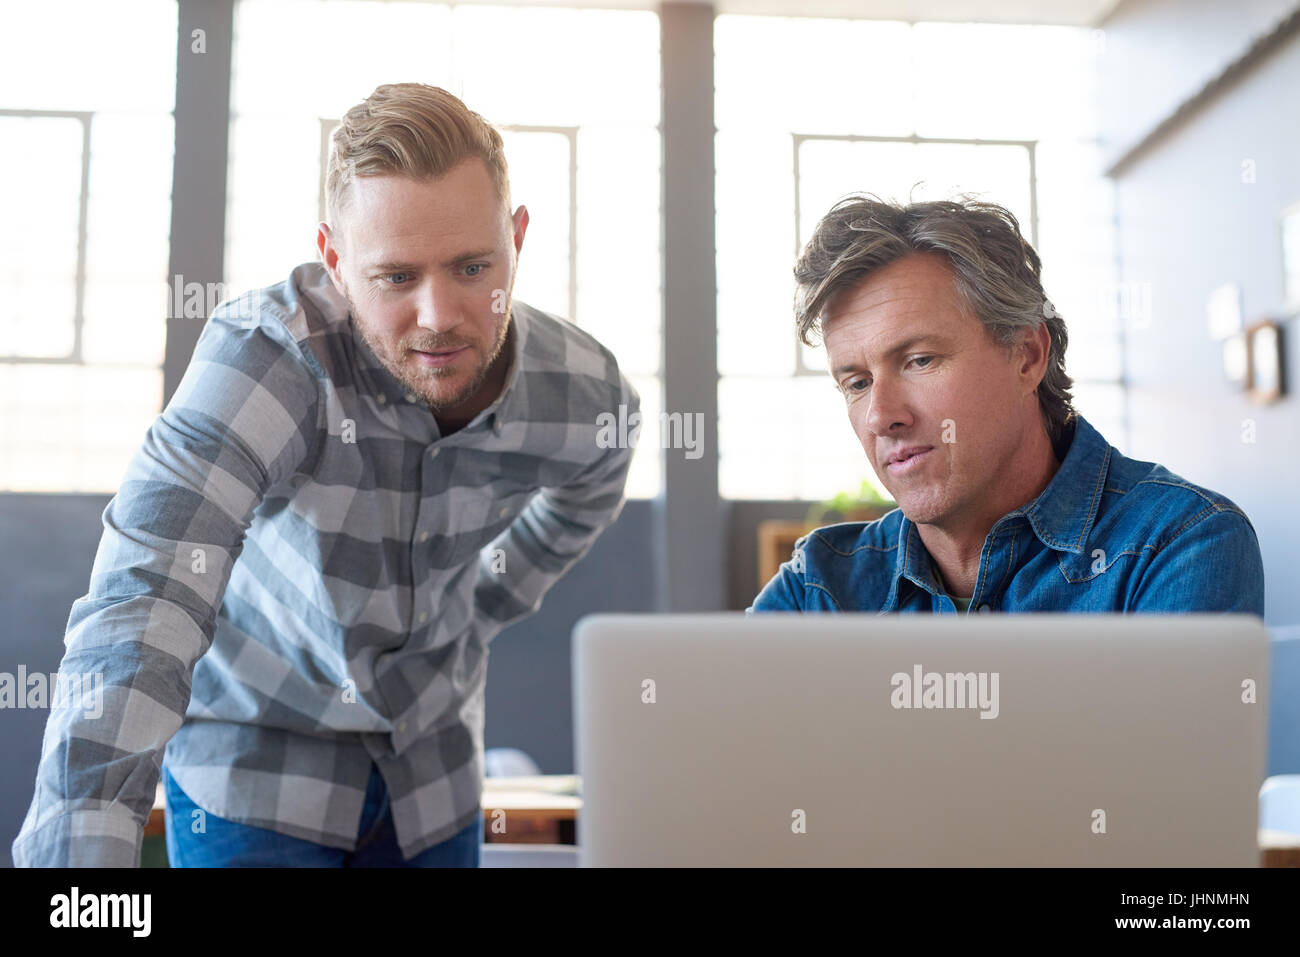 Focused young businessmen using a laptop at an office desk Stock Photo